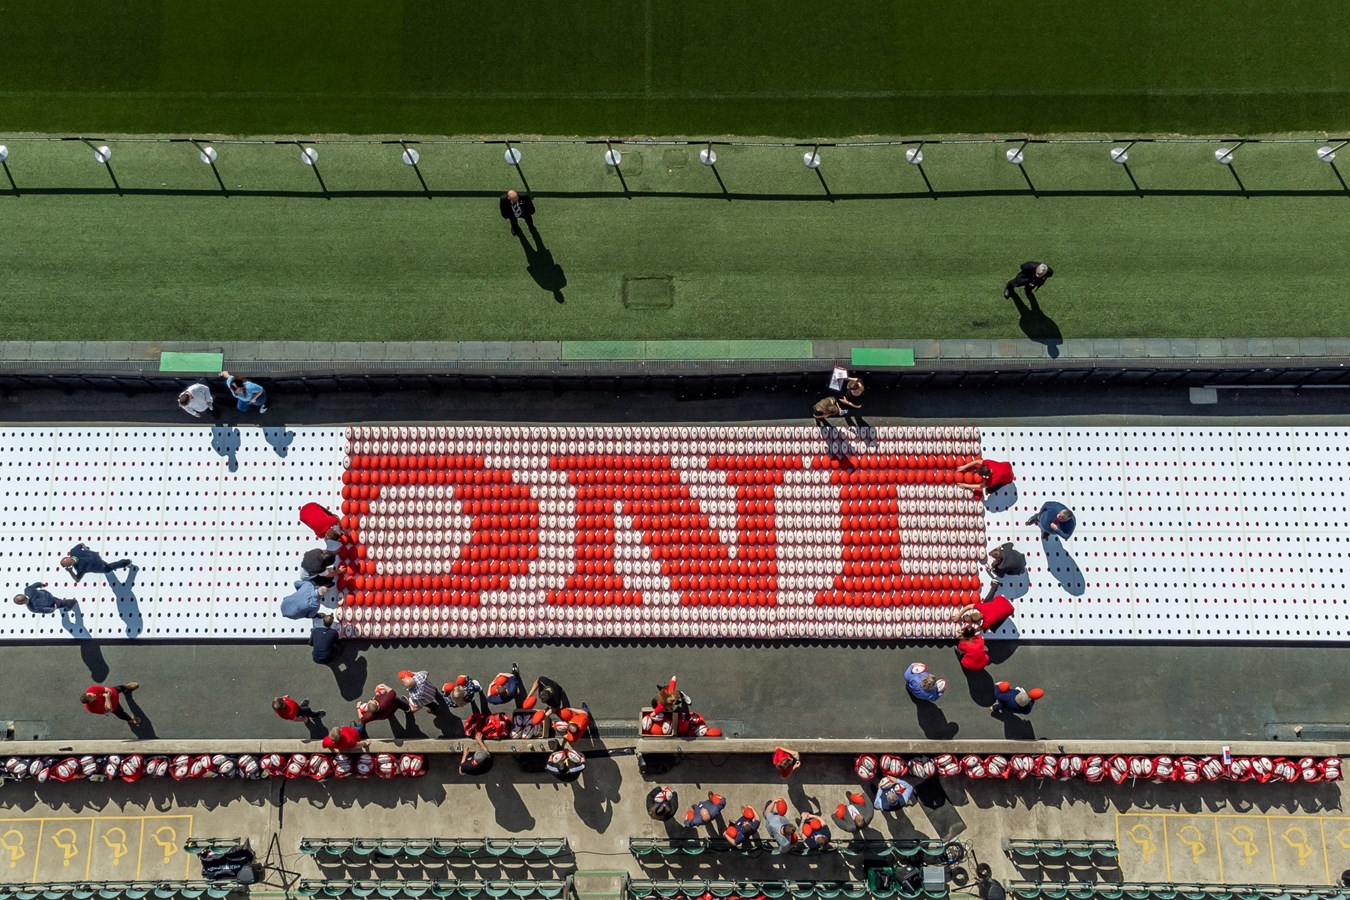 /images/news/2022-04-29-honda-uk-sets-guiness-record-for-largest-rugby-ball-mosaic-1.jpg